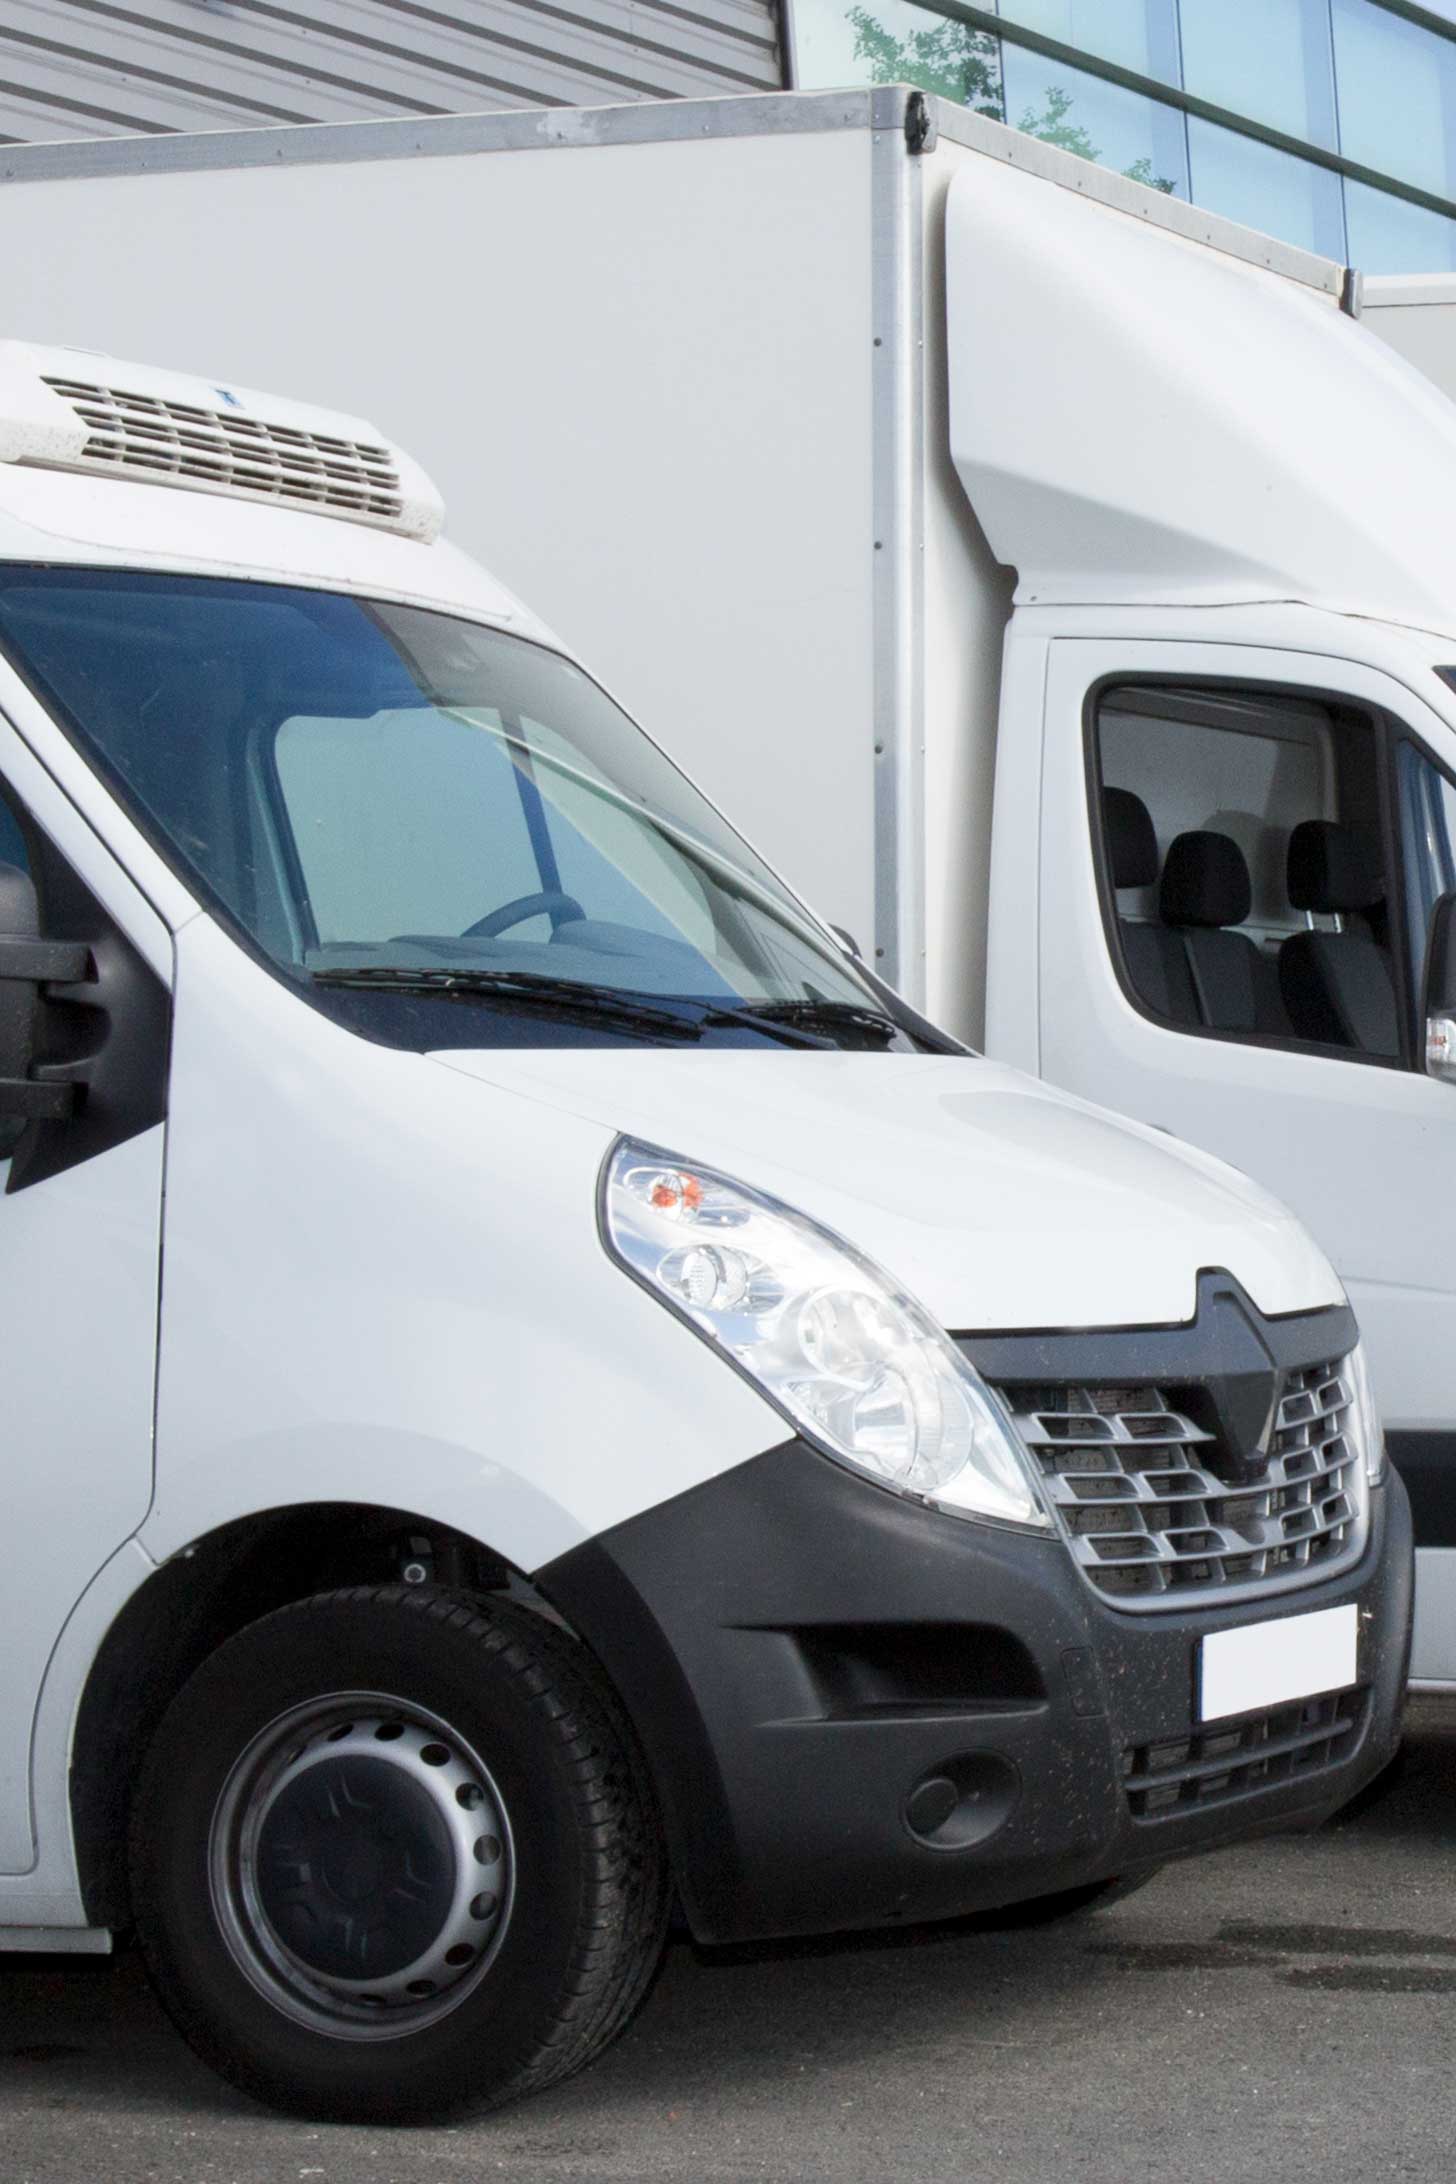 Are you Looking for Commercial Vehicle Services in Dublin?